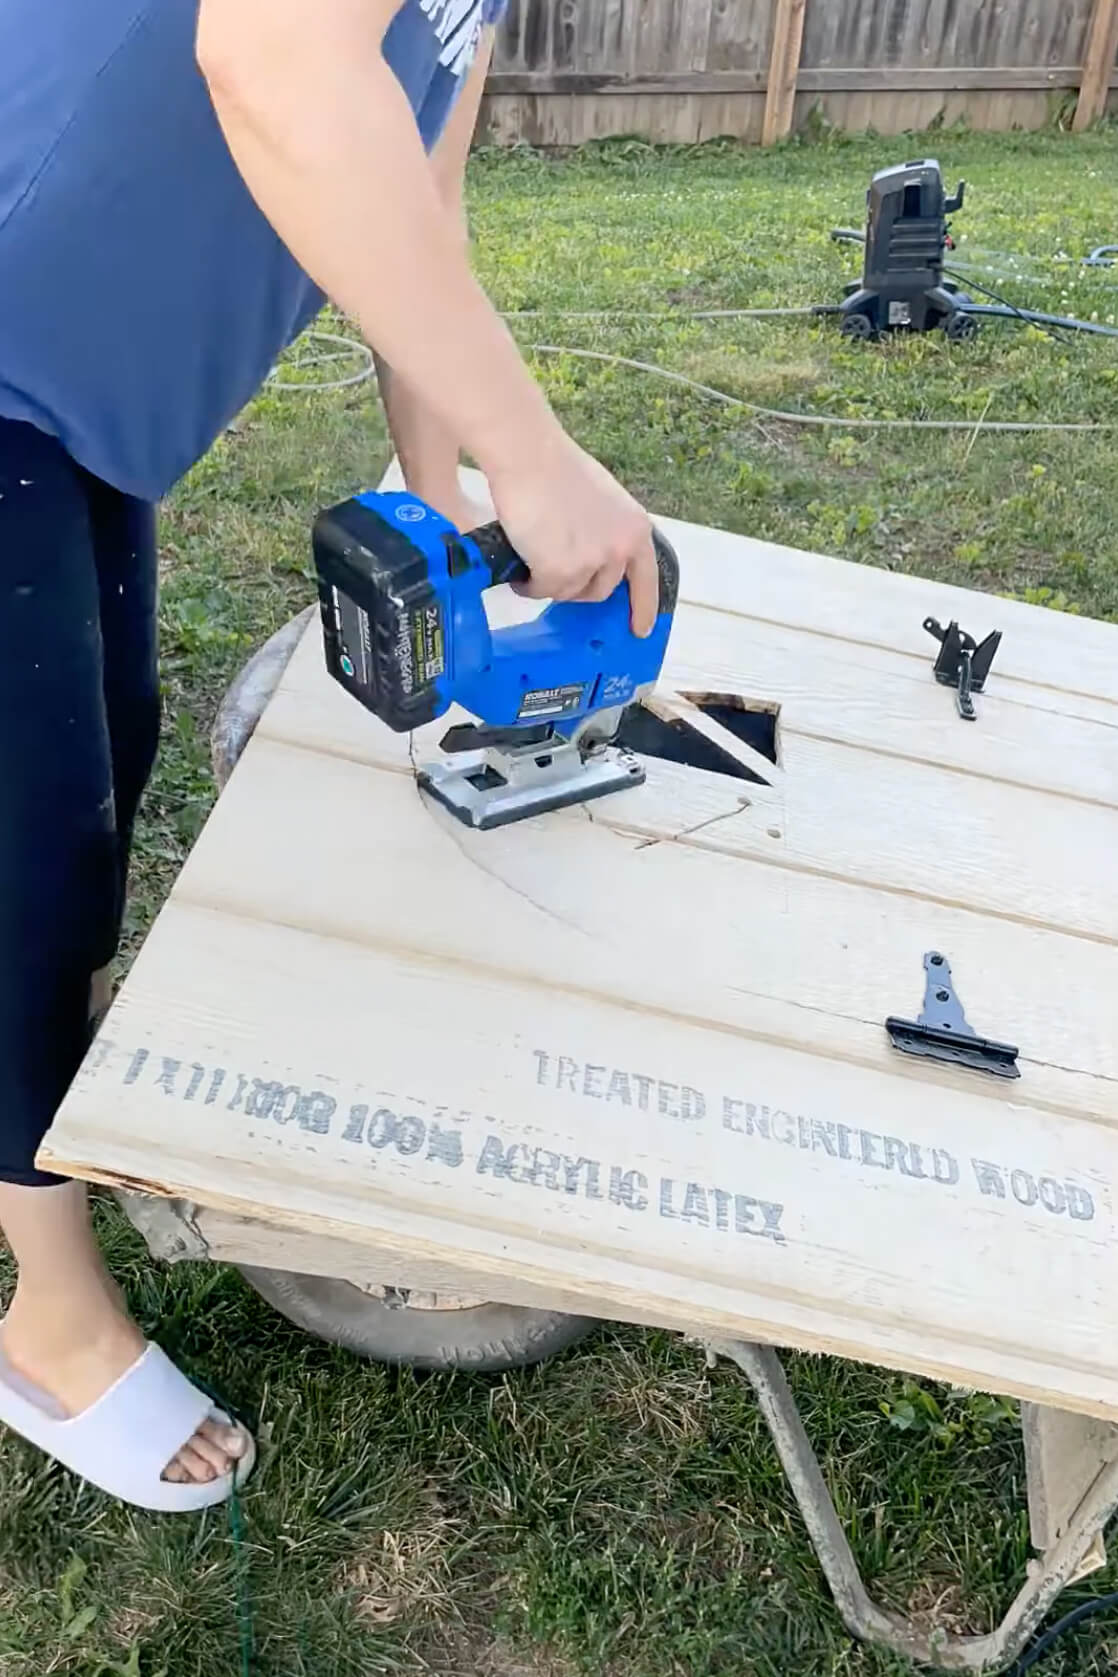 Using a drill to start a hole for a jig saw.